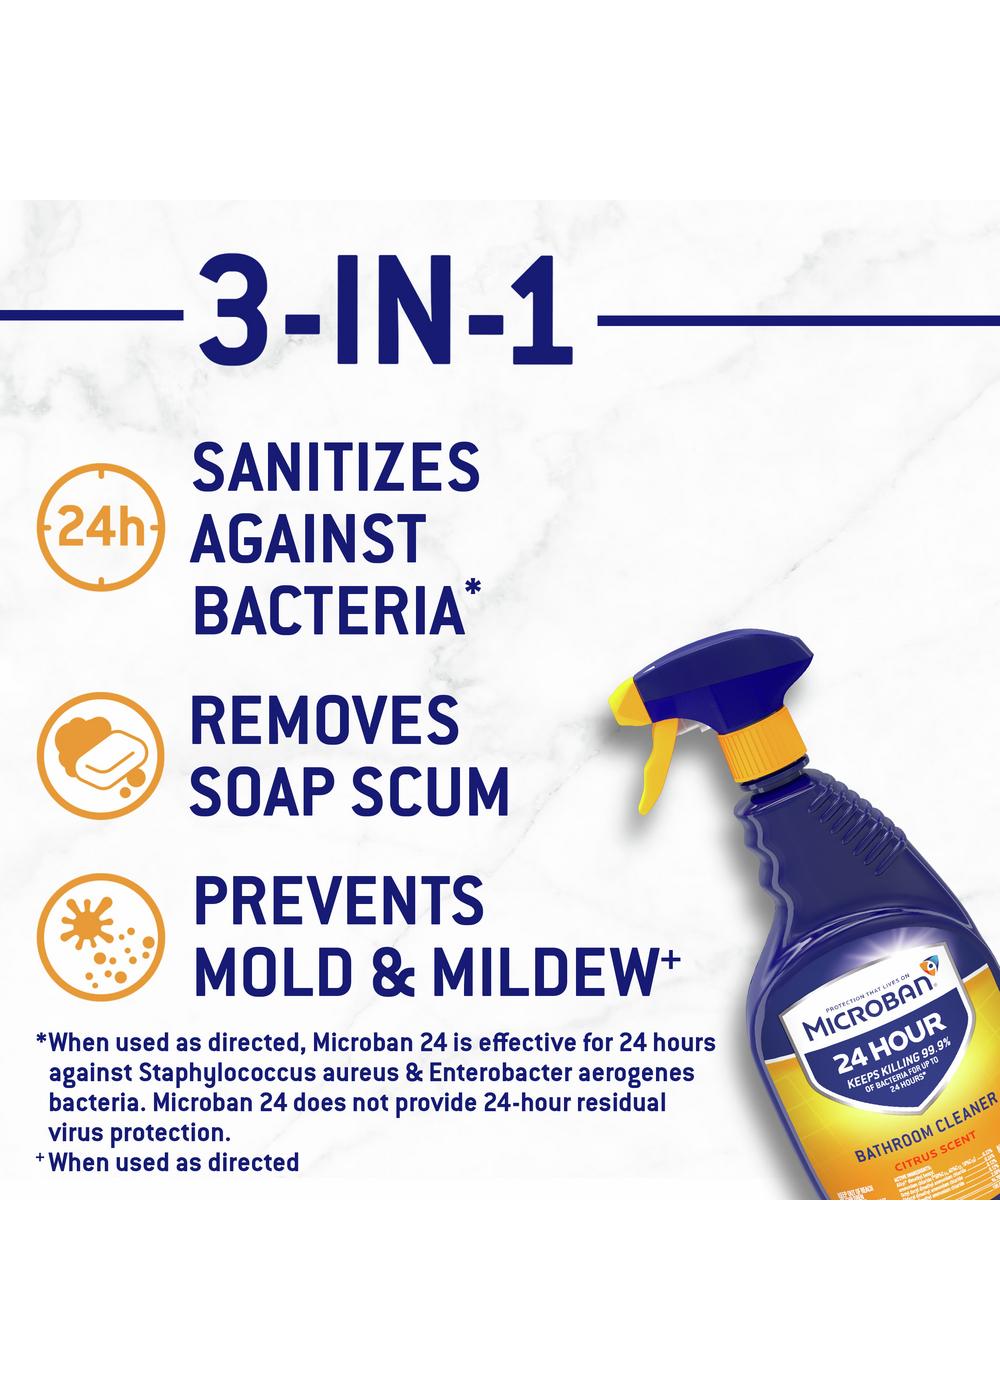 Microban Citrus 24 Hour Bathroom Cleaner and Sanitizing Spray; image 6 of 11